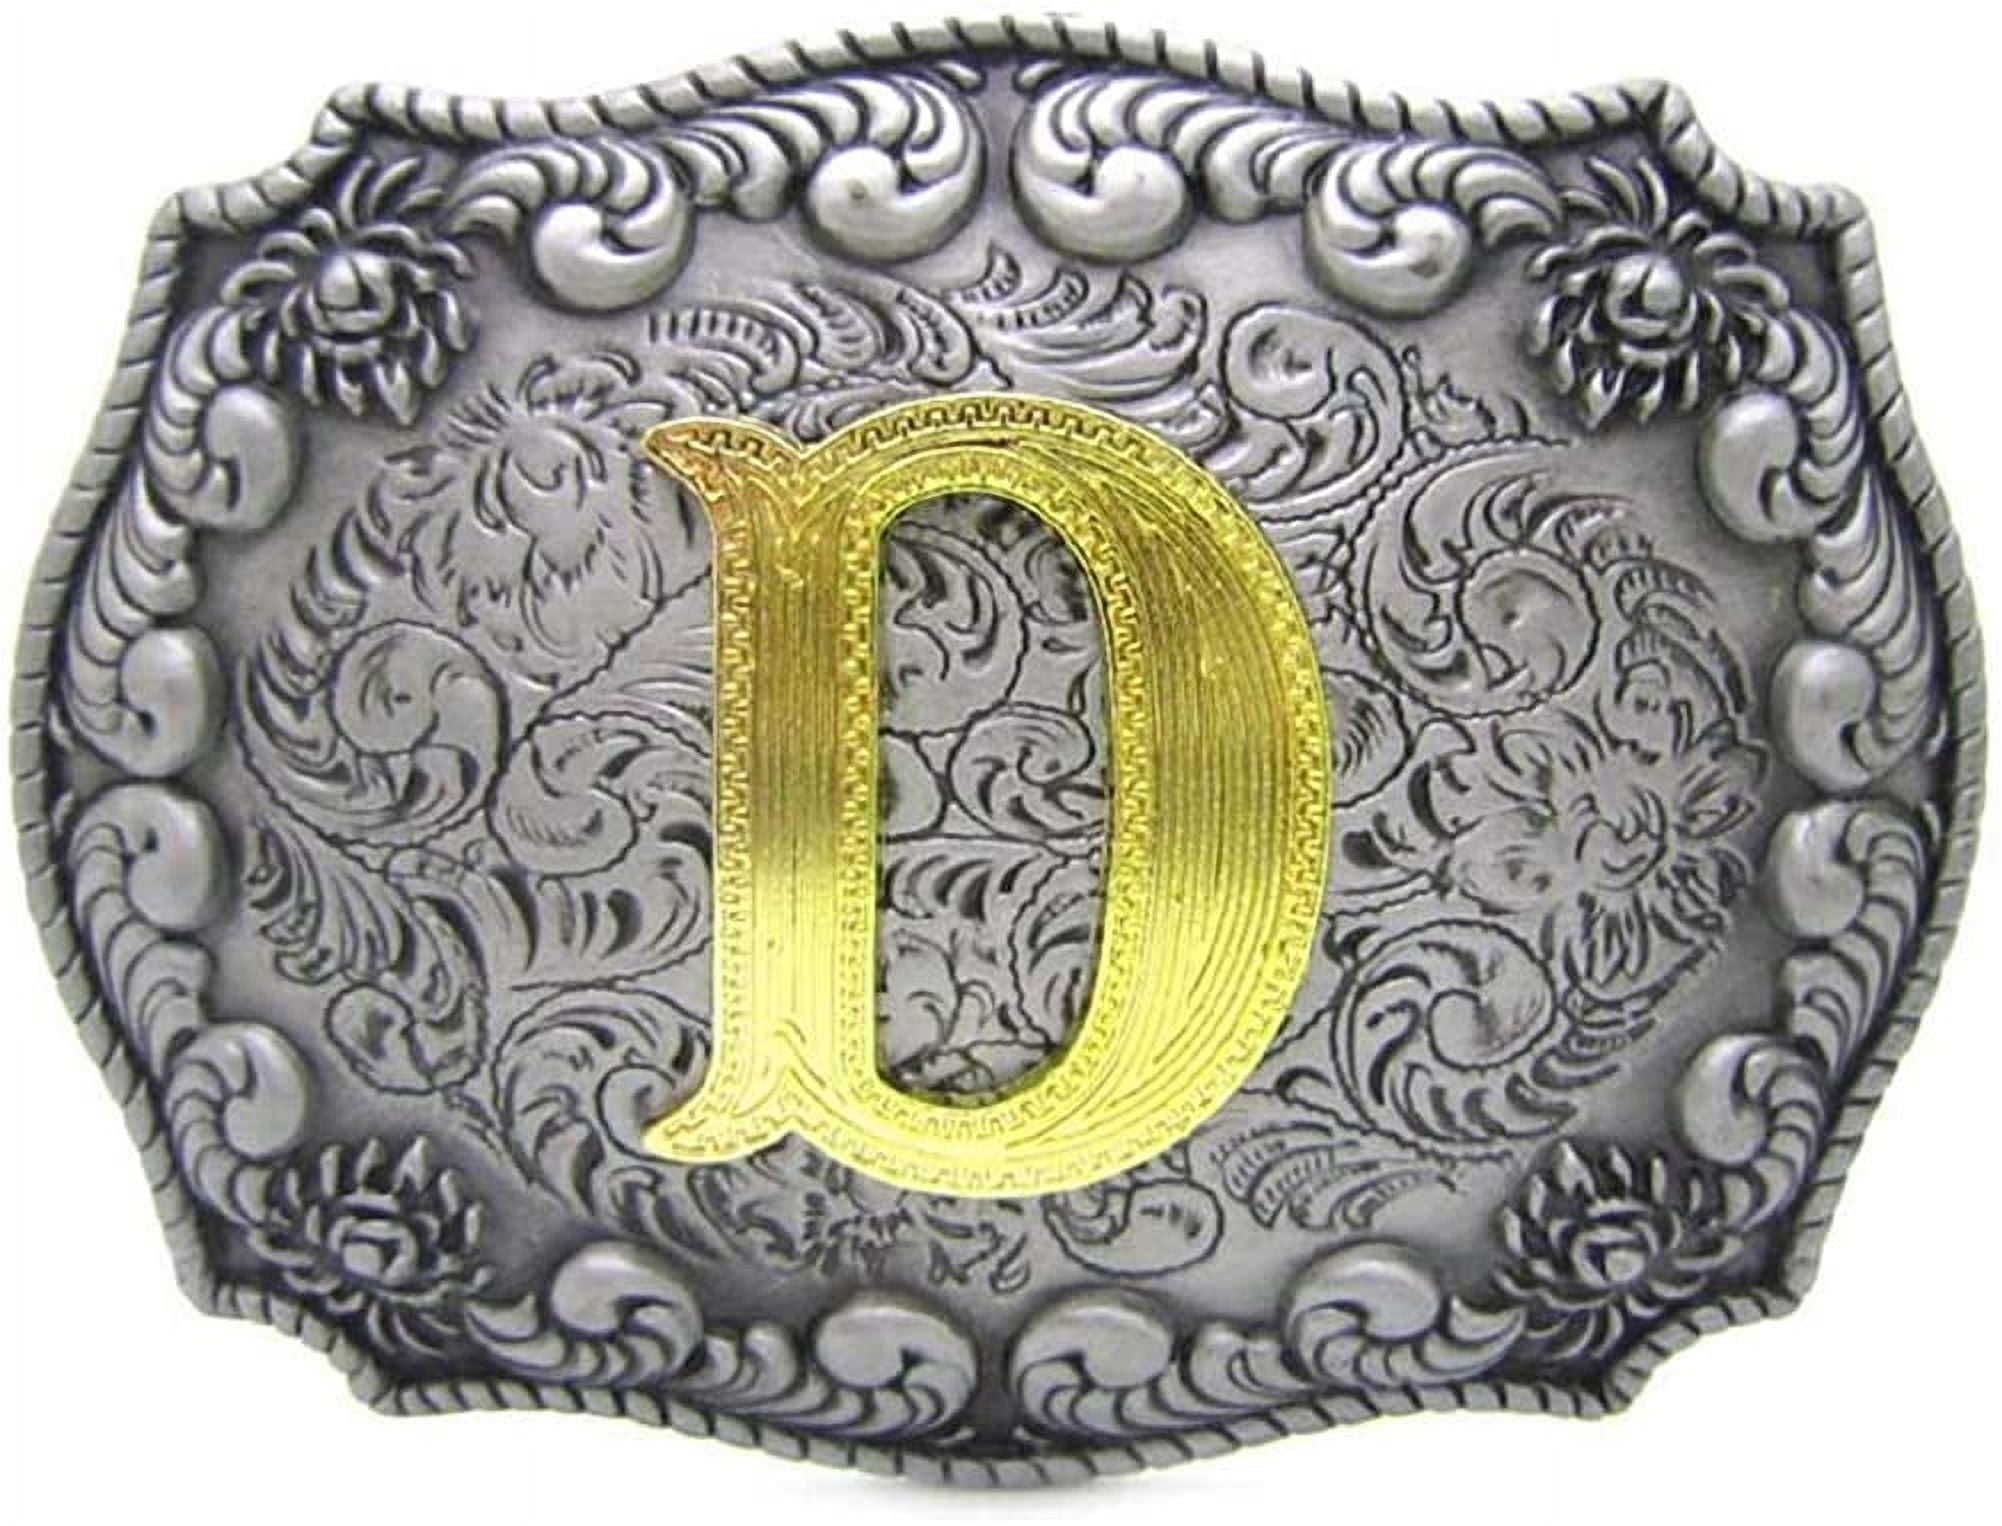 Itera Western Cowboy/Cowgirl Initial Belt Buckle - Silver- Large, Letter Buckles for Men and Women